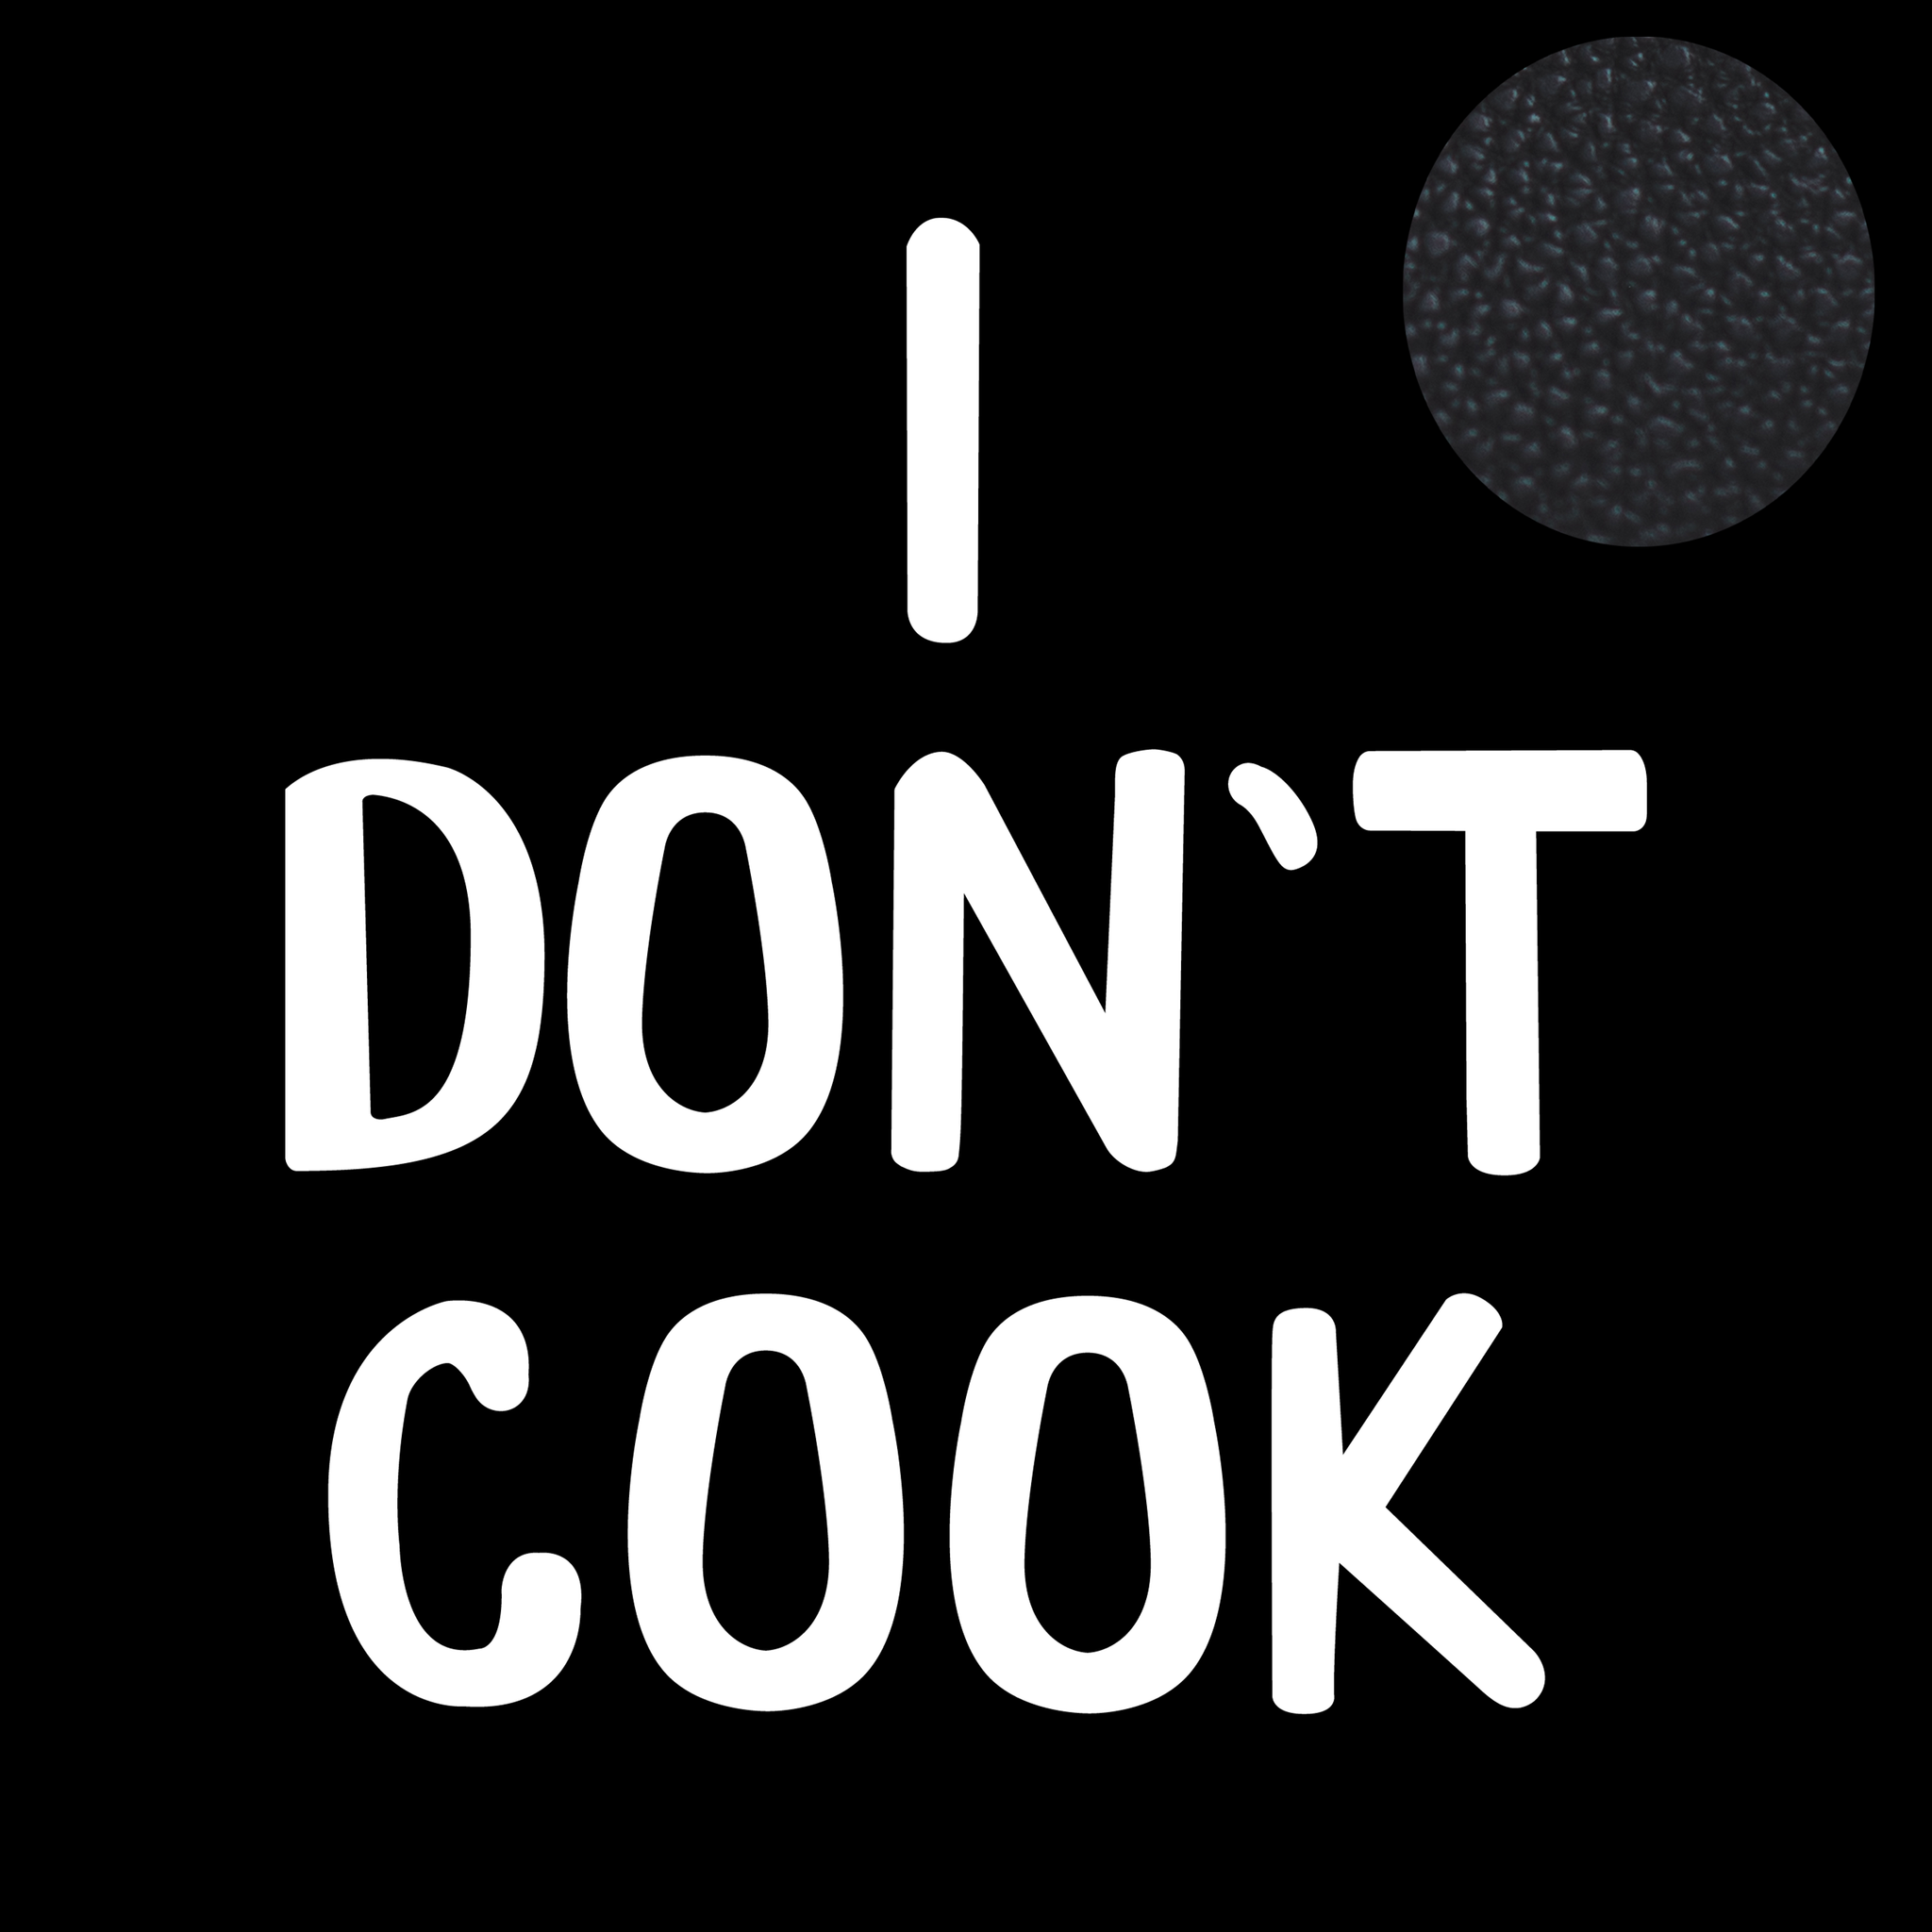 I Don't Cook | Chef